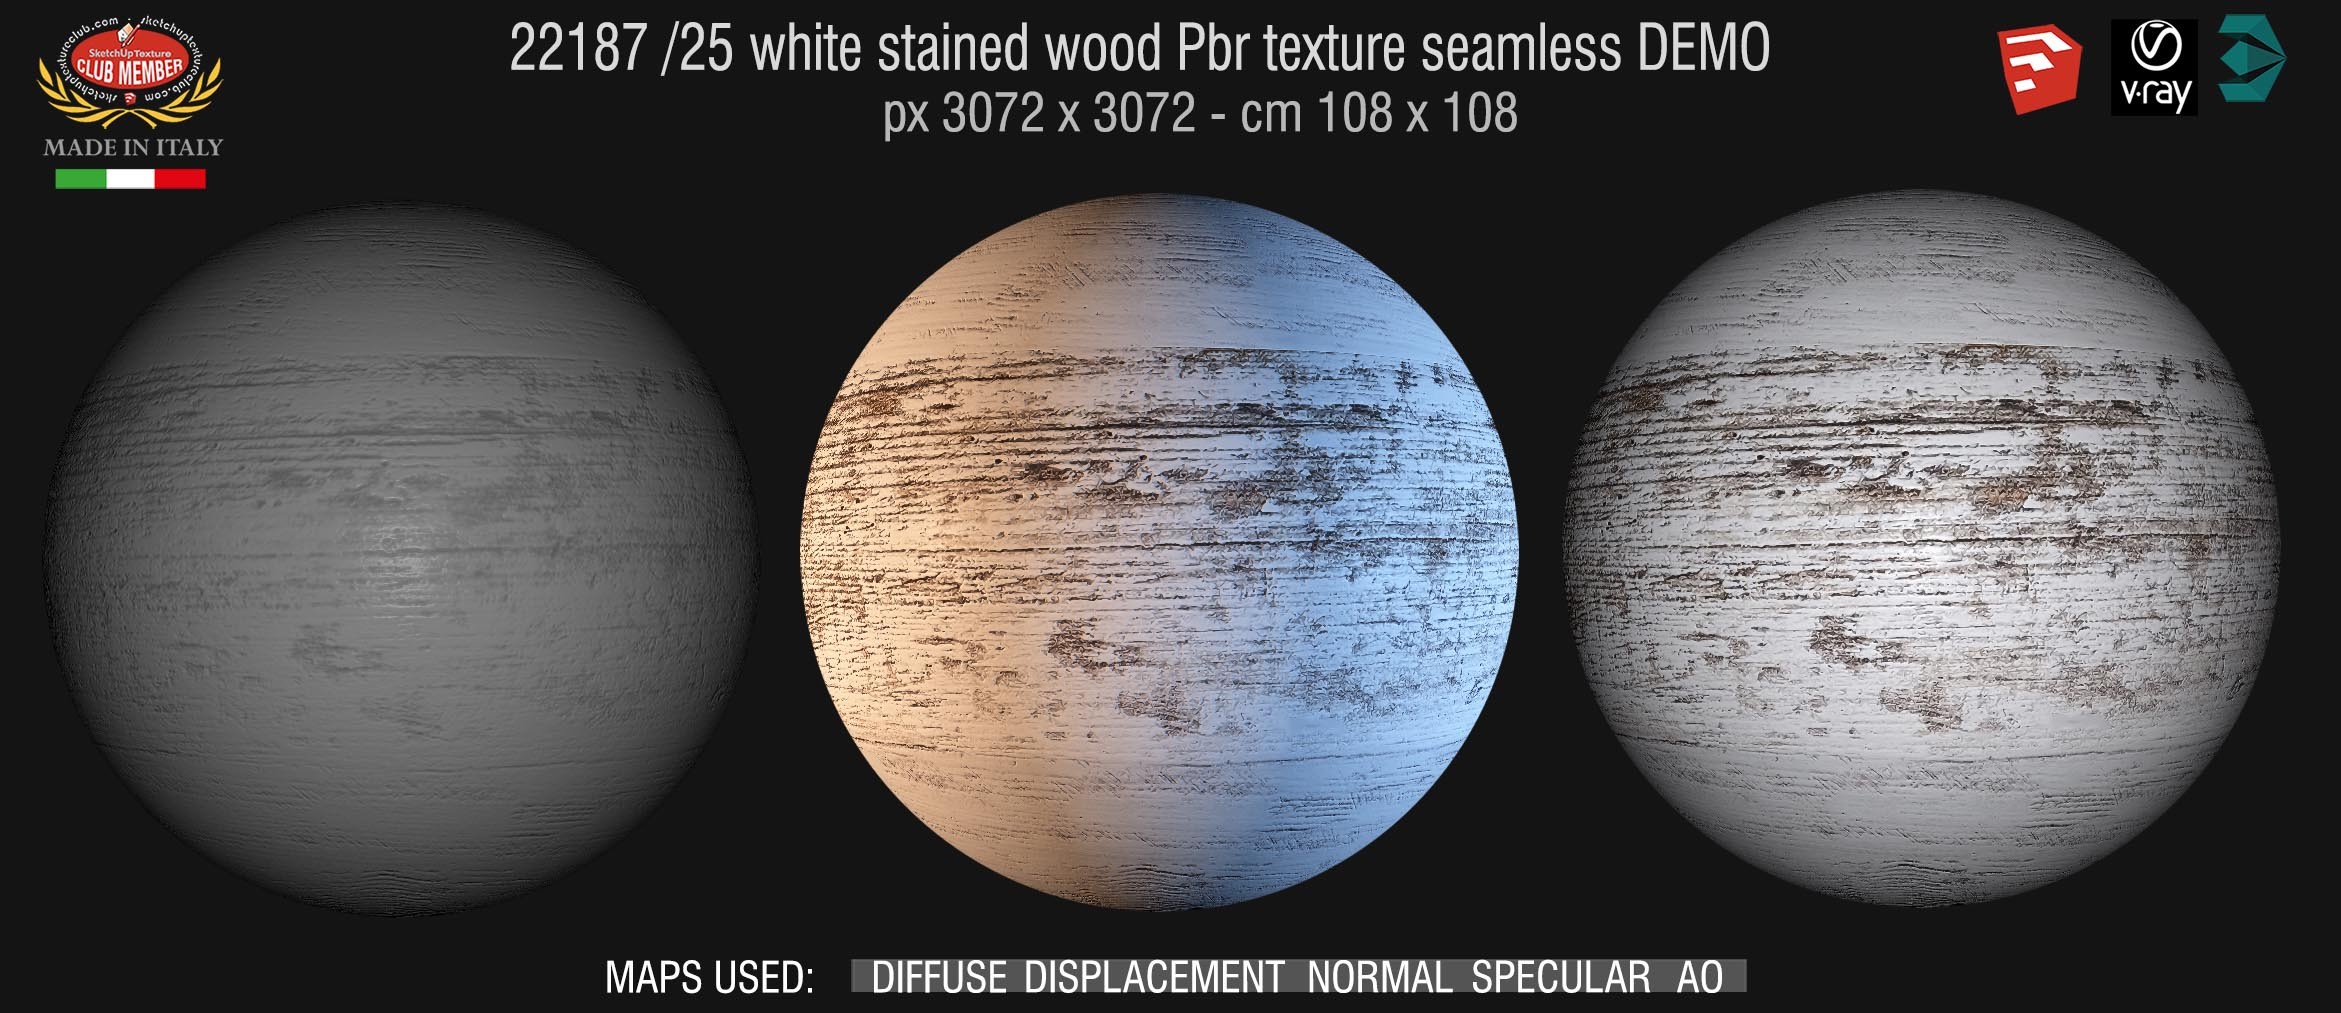 22187/25 white stained wood Pbr texture seamless DEMO